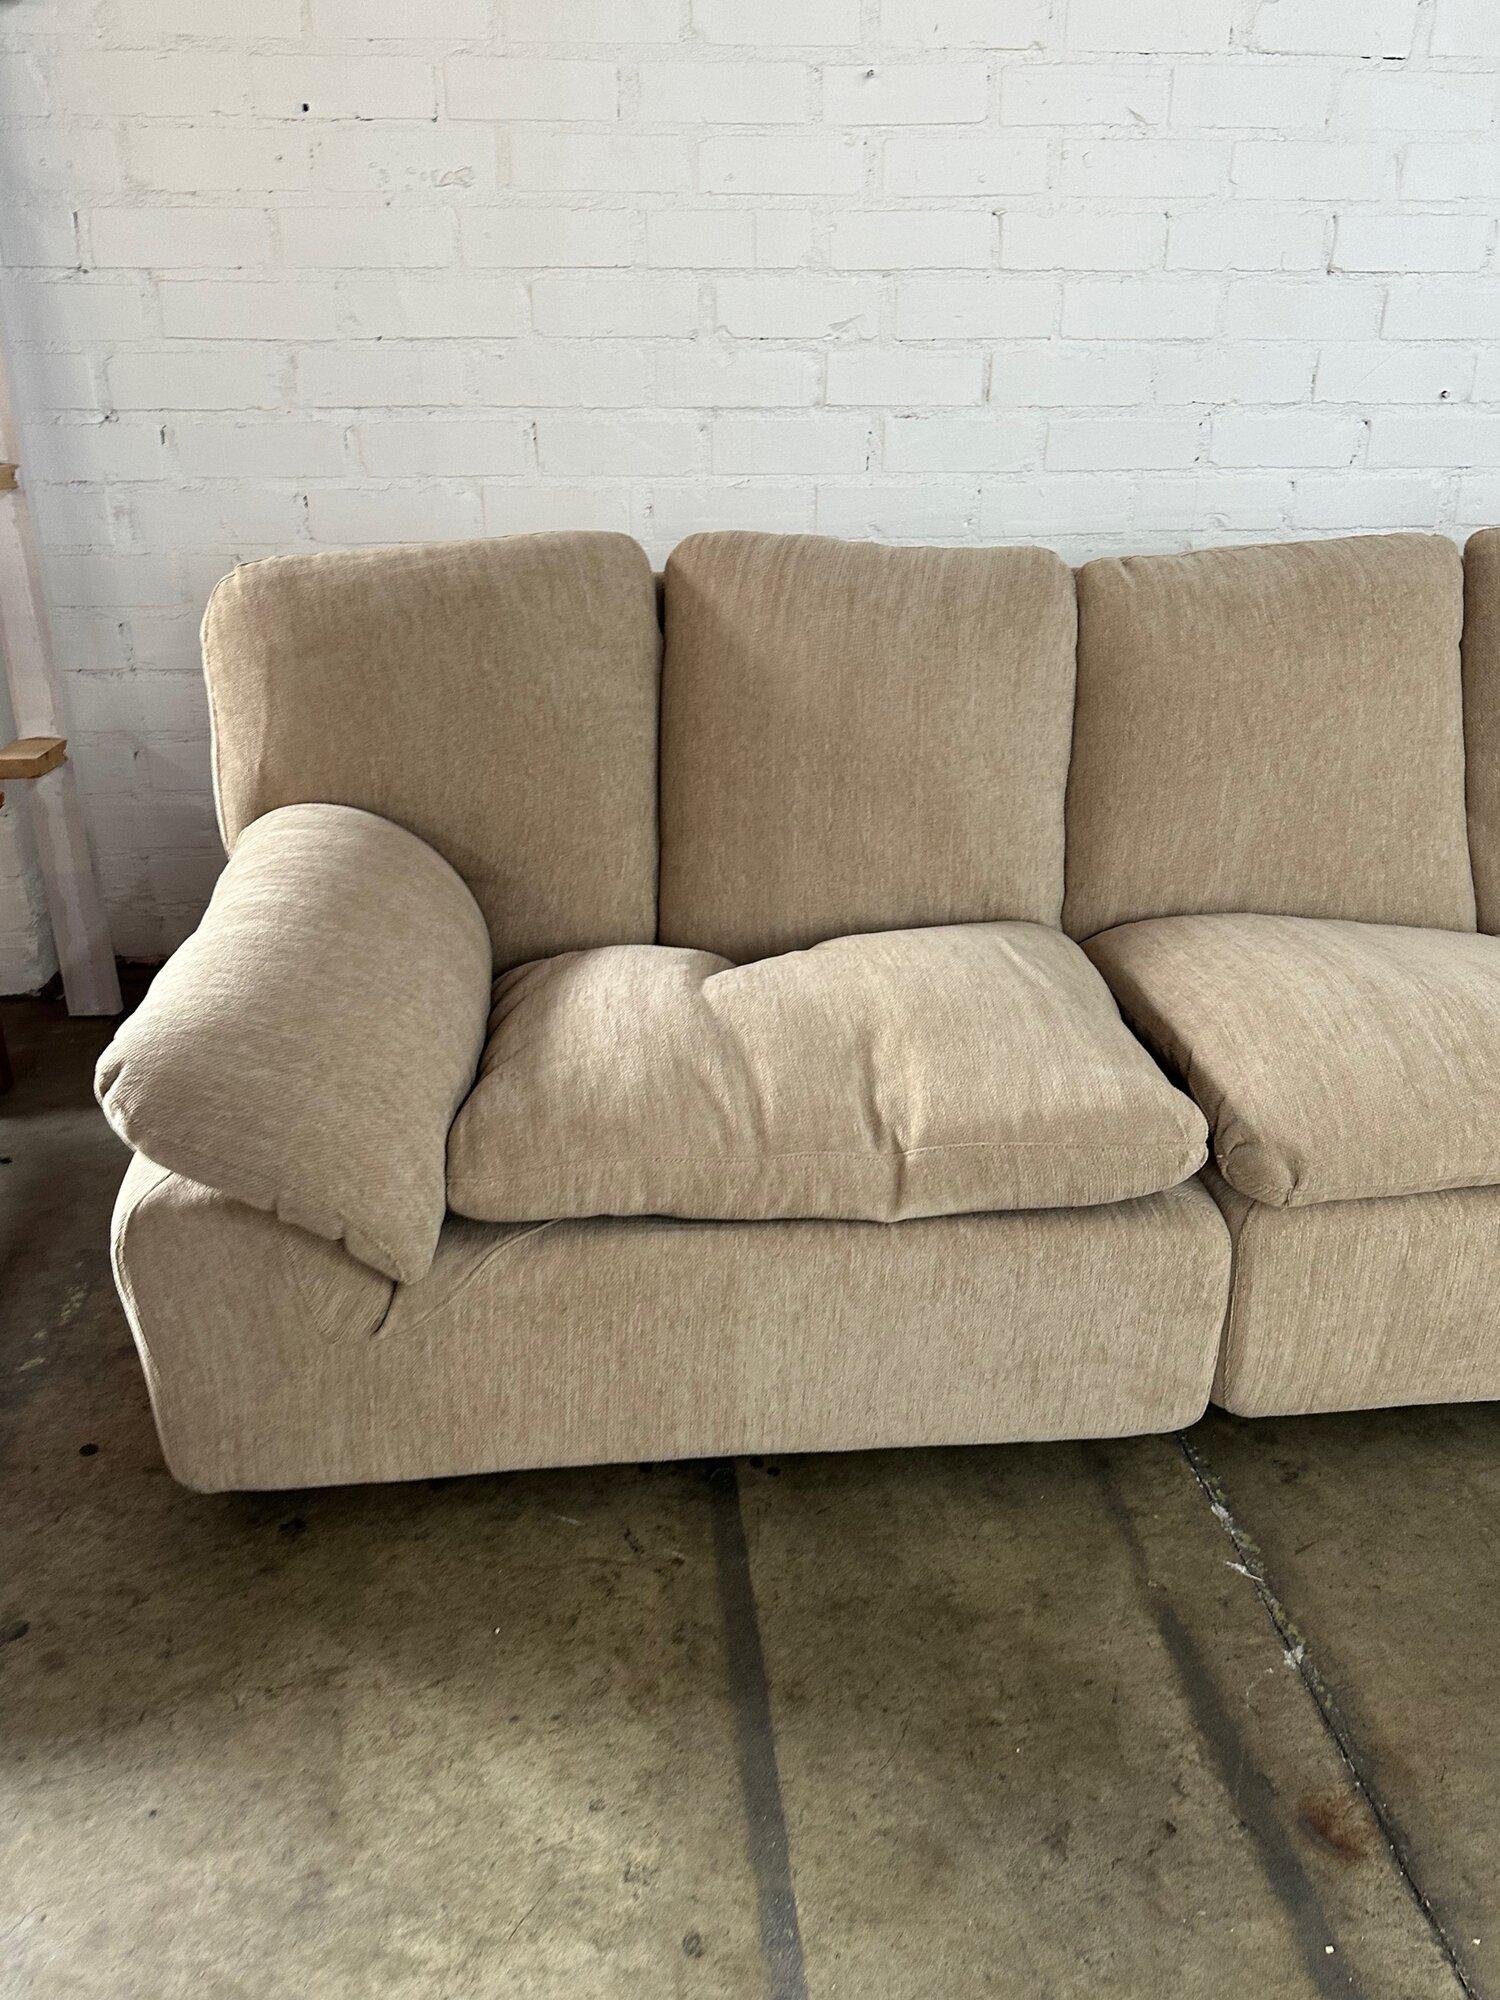 Late 20th Century Italian vintage Modular sofa- sold separately For Sale